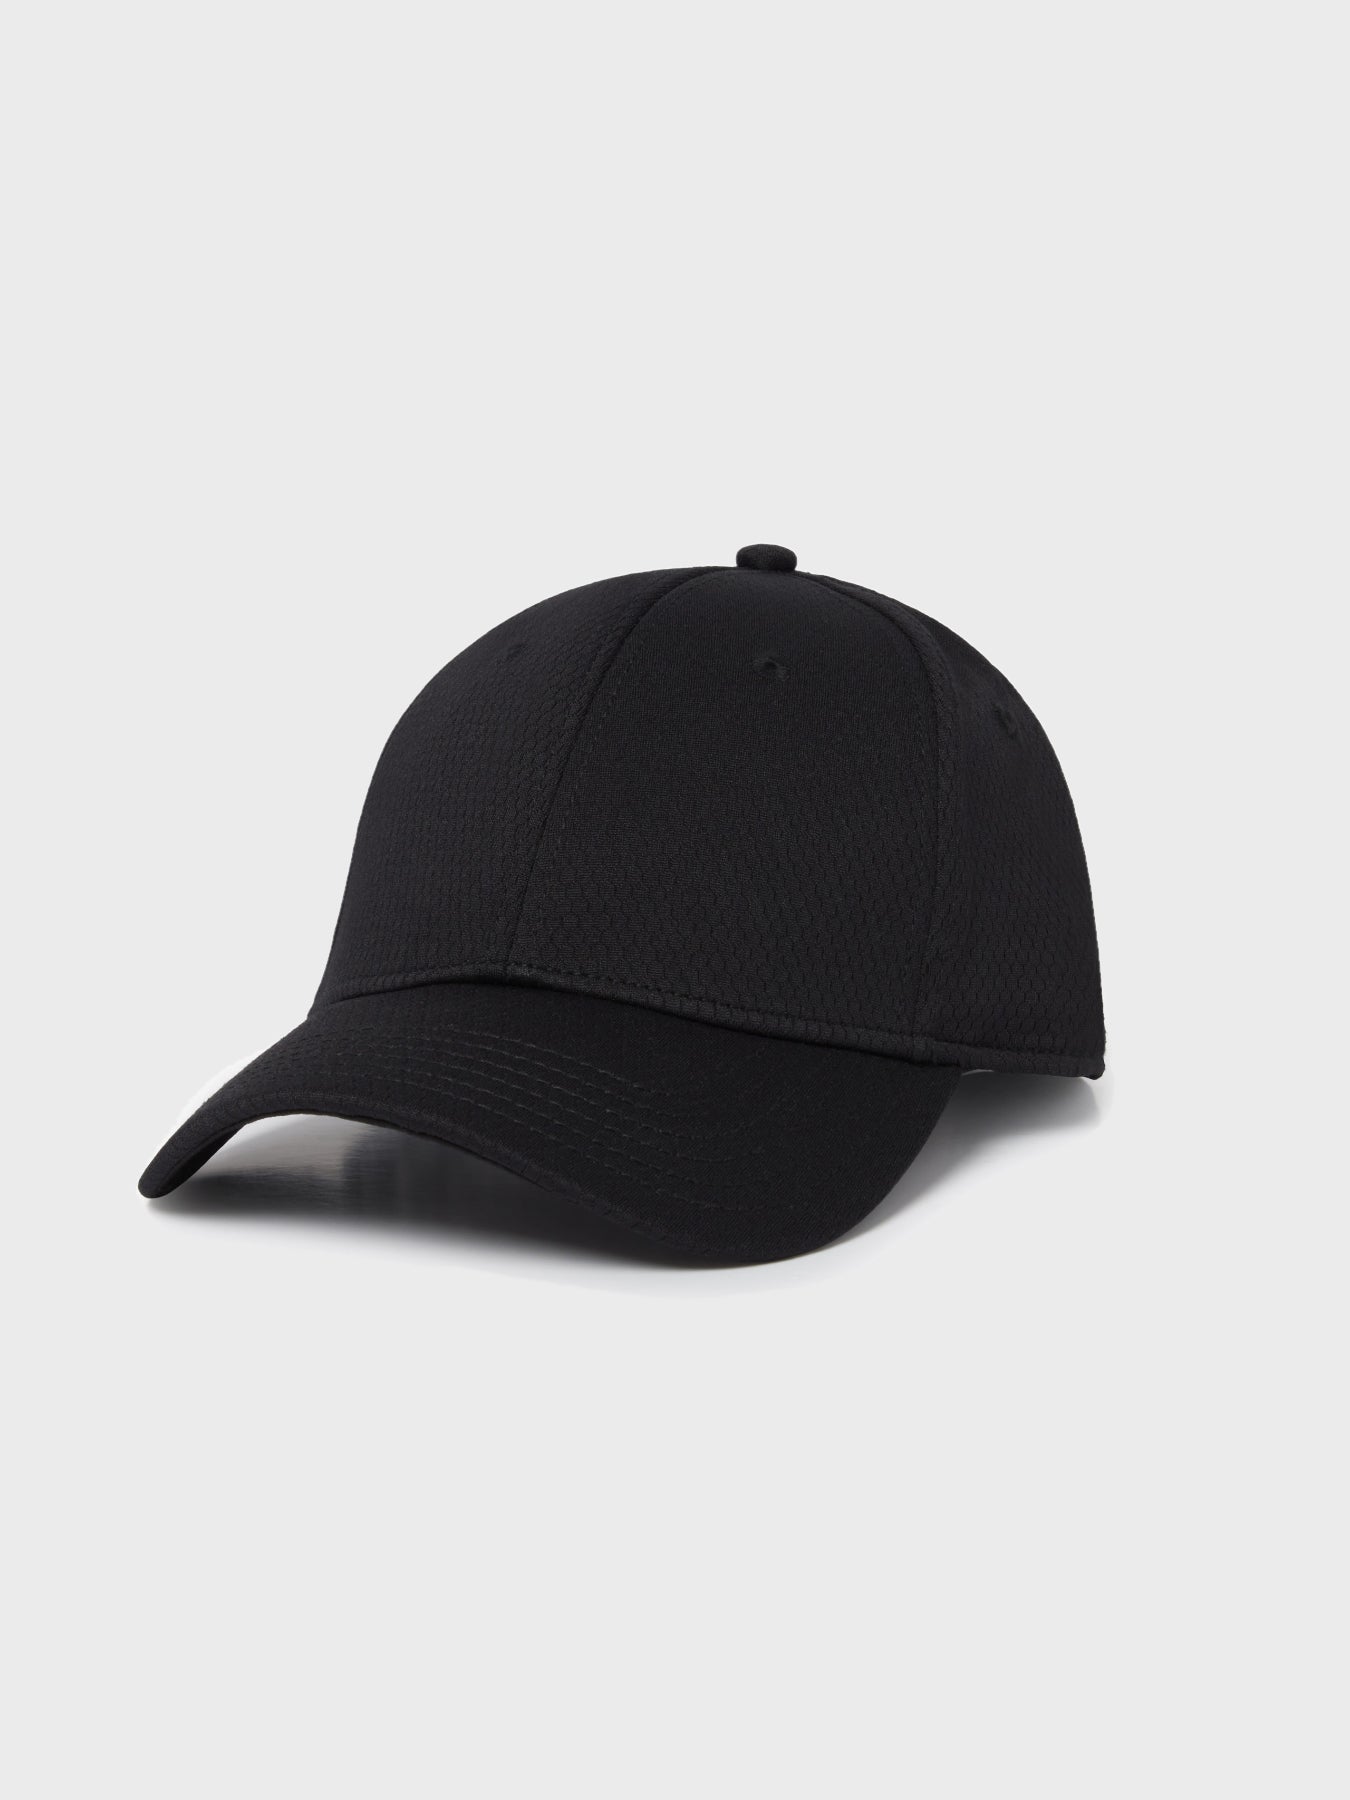 View Womens Front Crested Structured Golf Hat In Black Black OS information